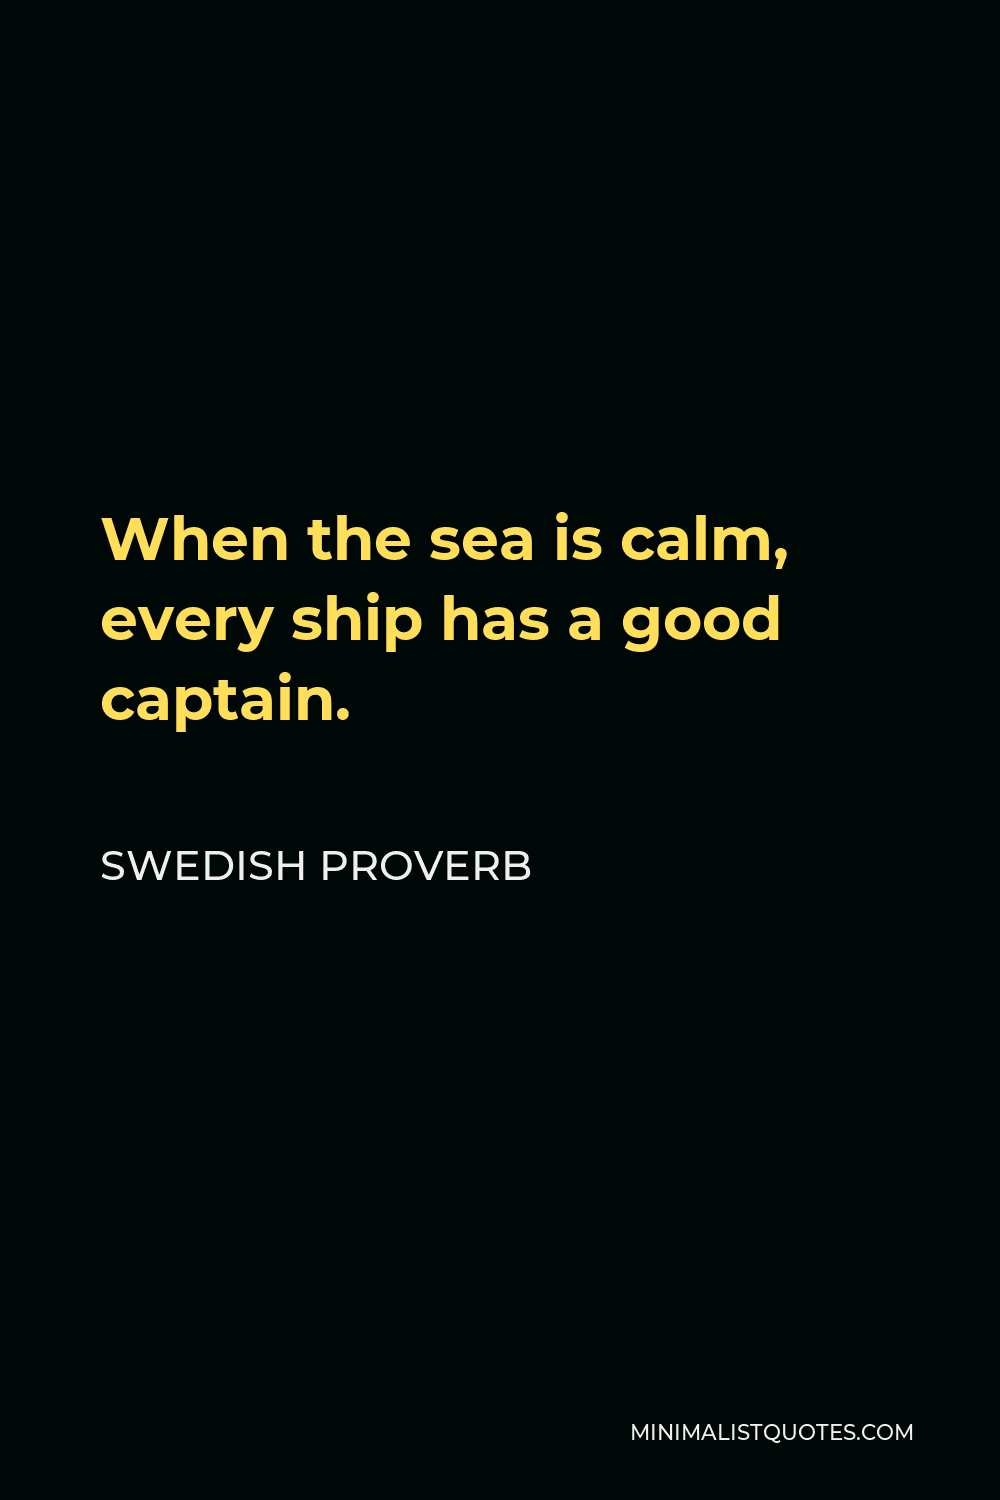 Swedish Proverb Quote - When the sea is calm, every ship has a good captain.